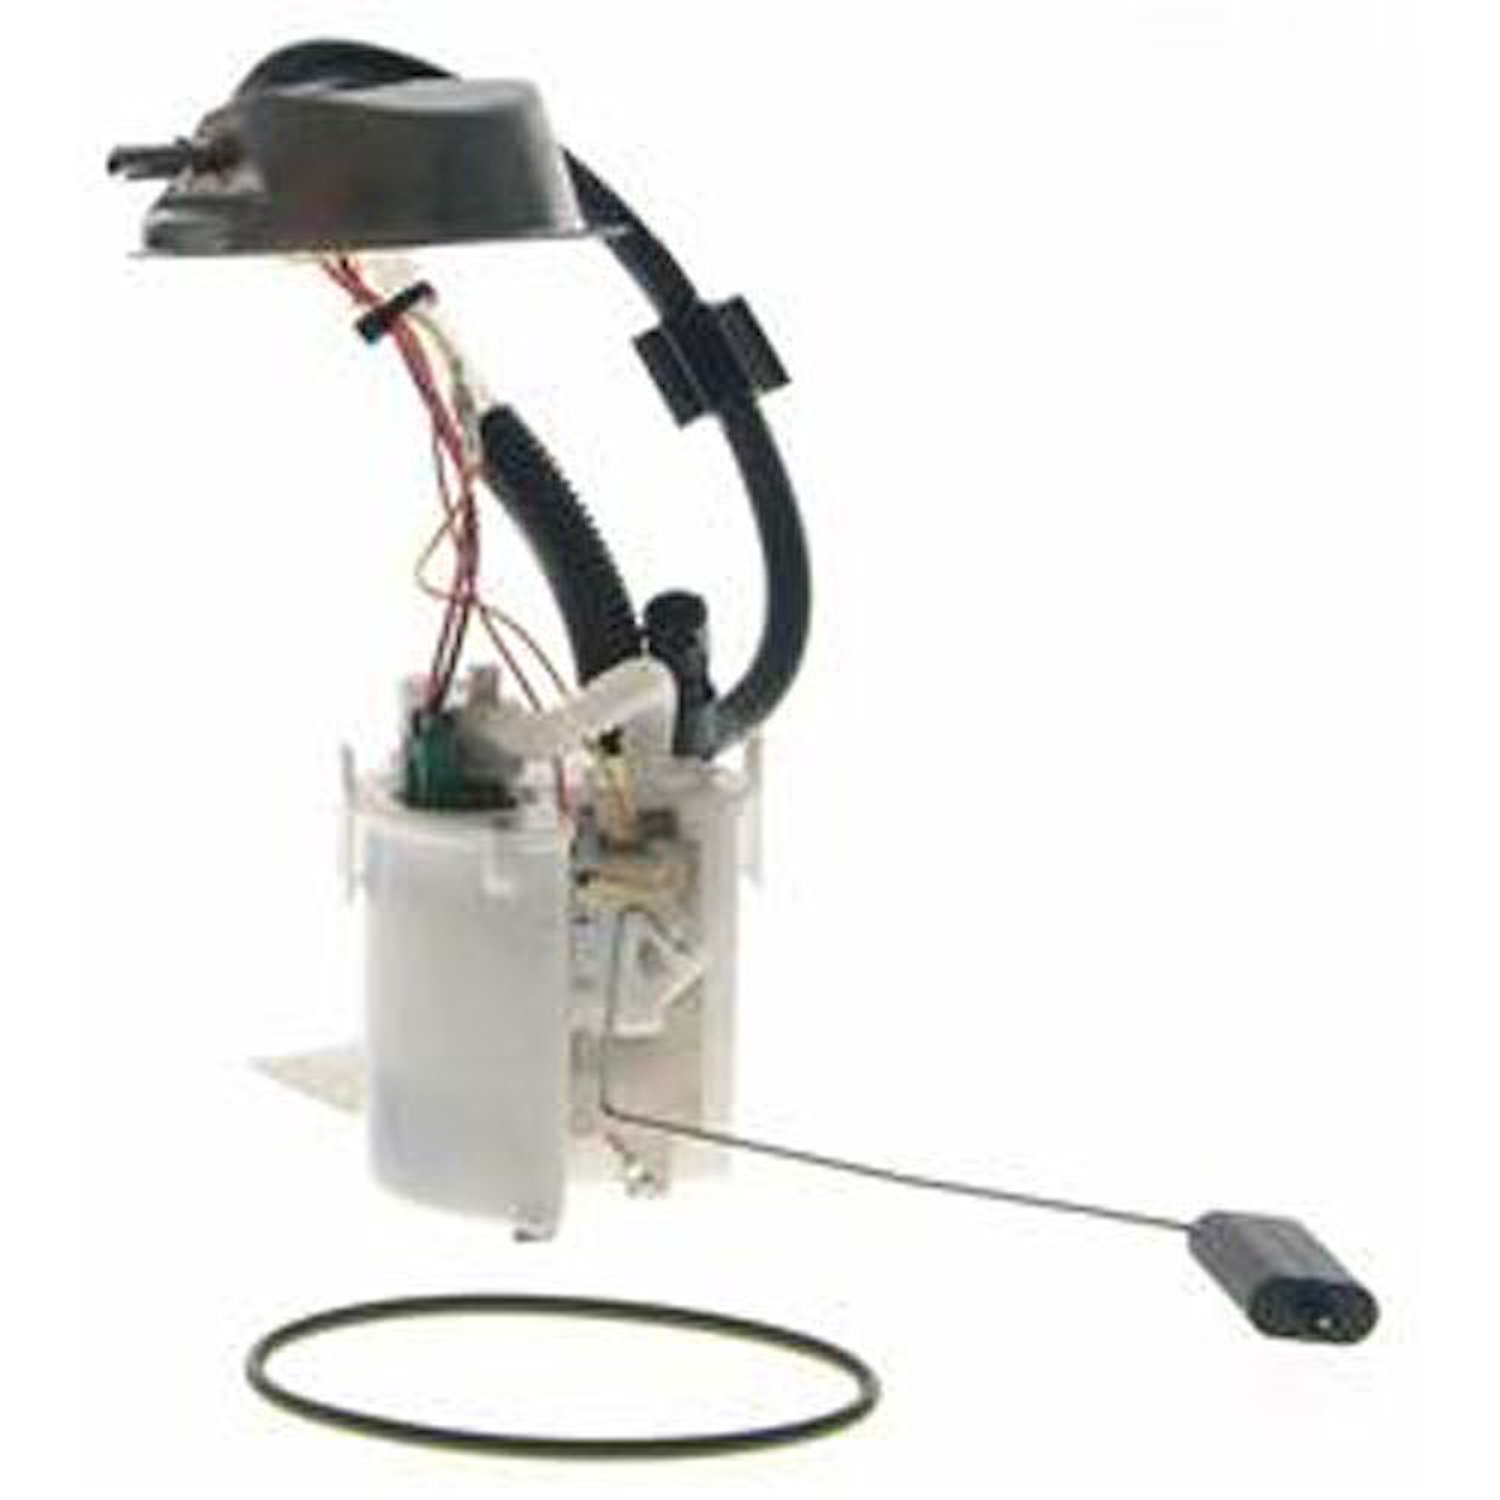 OE Ford Replacement Electric Fuel Pump Module Assembly 2004-07 Ford Focus 2.0L/2.3L 4 Cyl